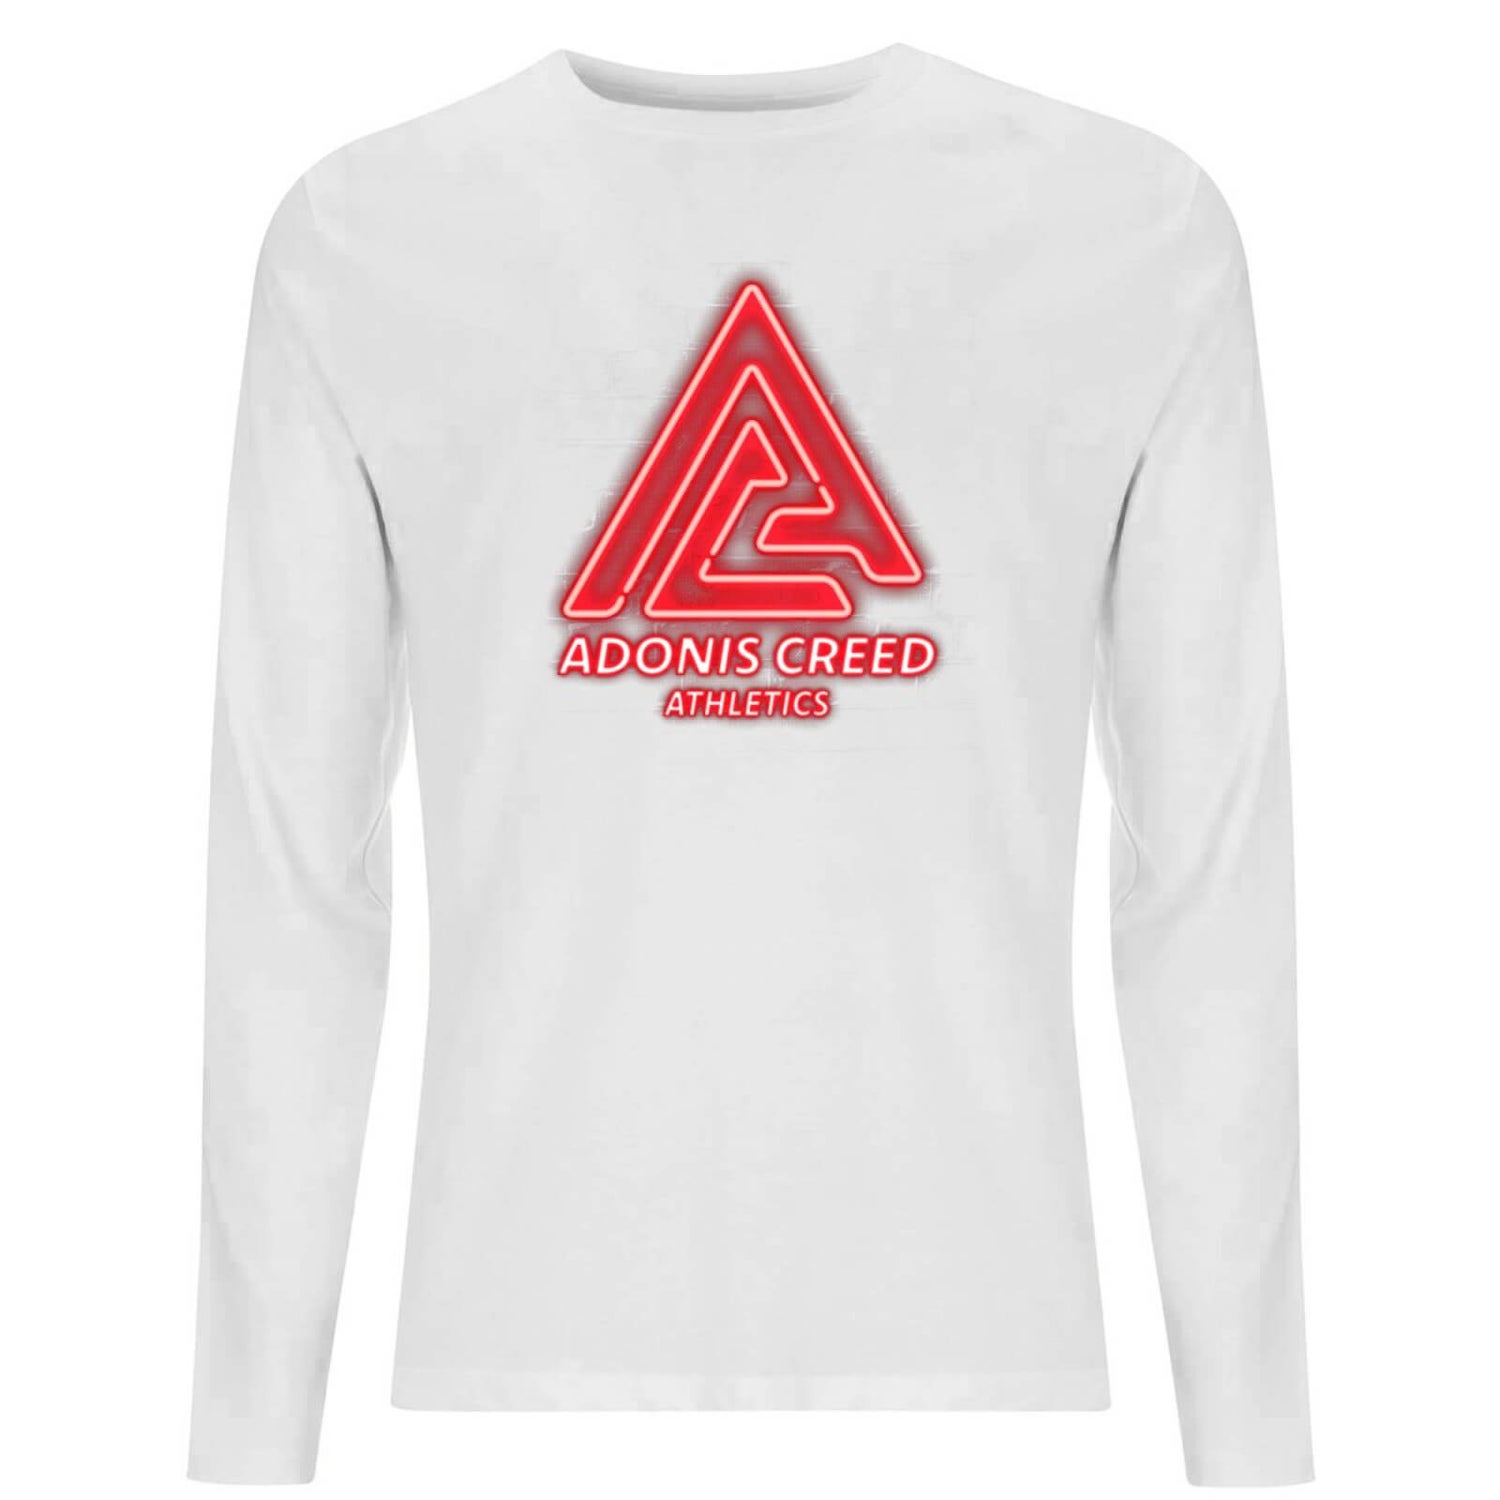 Creed Adonis Creed Athletics Neon Sign Men's Long Sleeve T-Shirt - White